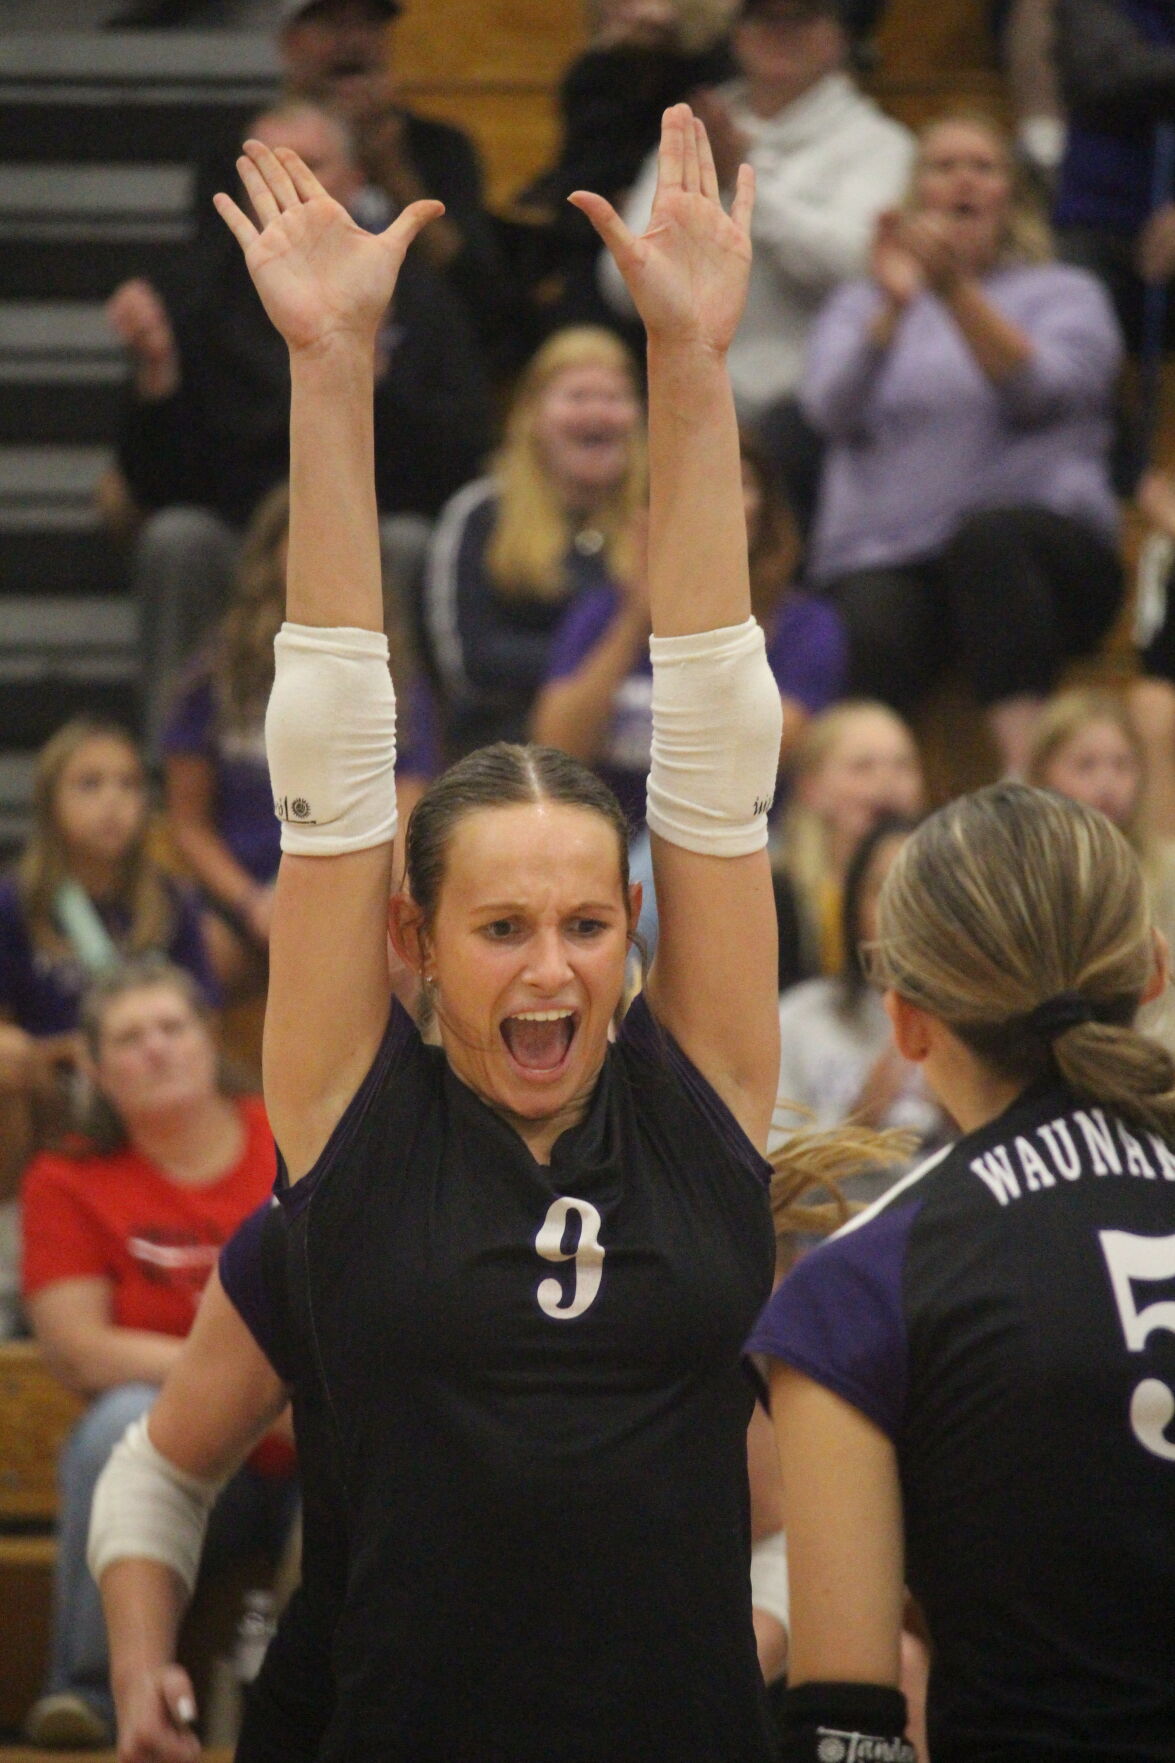 Waunakee’s Volleyball Team Shines, Finishes Second at Kettle Moraine Invitational